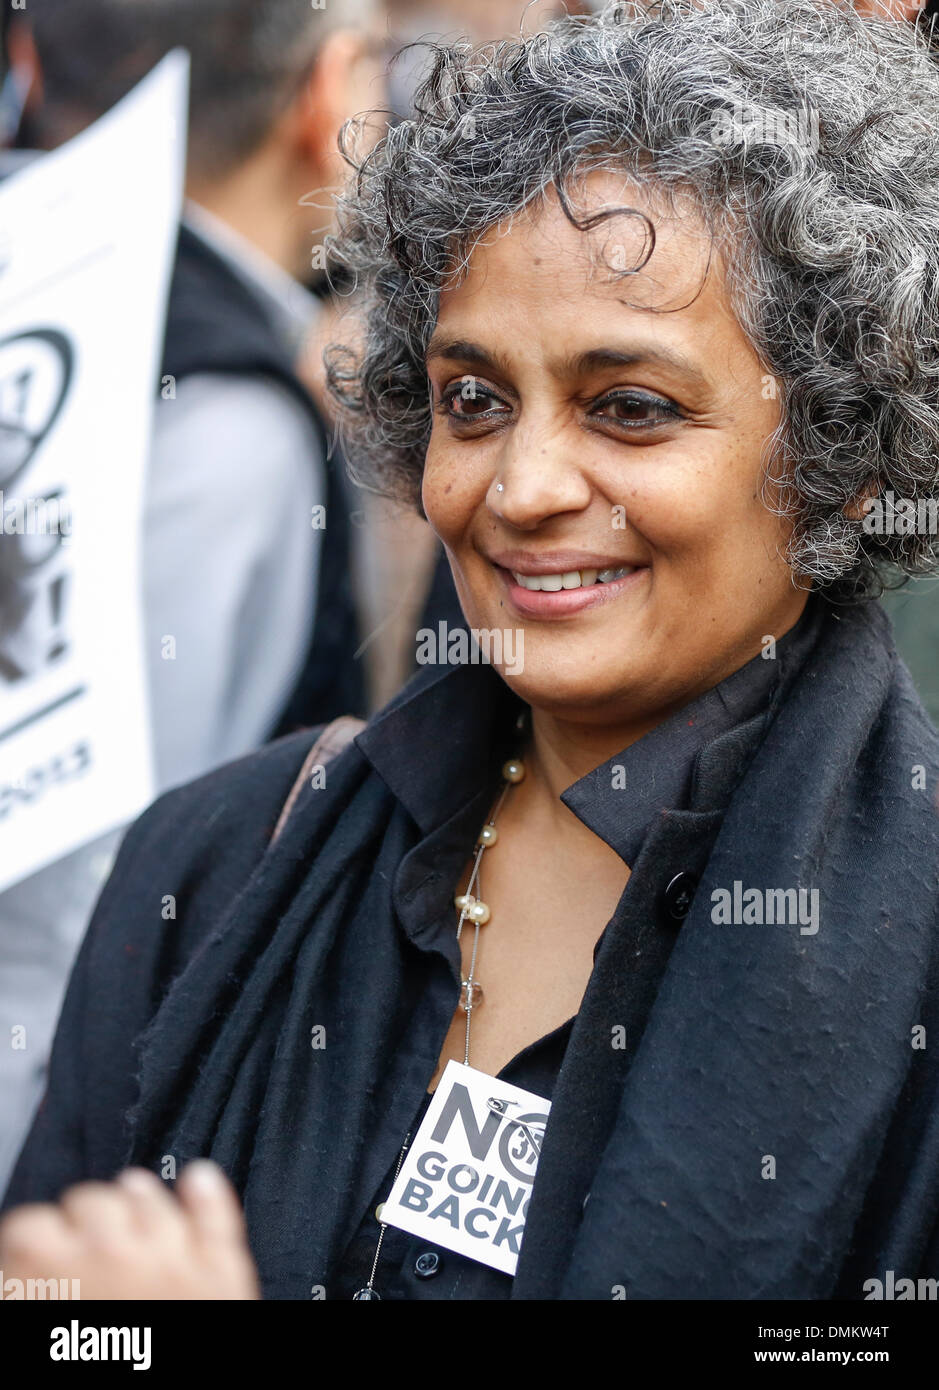 Delhi, India. 15th Dec 2013. Author and political activist Arundhati Roy at the event. Delhi’s LGBT community observed a 'Day of Rage' and came out in huge numbers to protest against the Supreme Courts December 11, 2013 ruling reinstating Section 377 of the Indian Penal Code, effectively making homosexuality a criminal offence. Credit:  Jiti Chadha/Alamy Live News Stock Photo